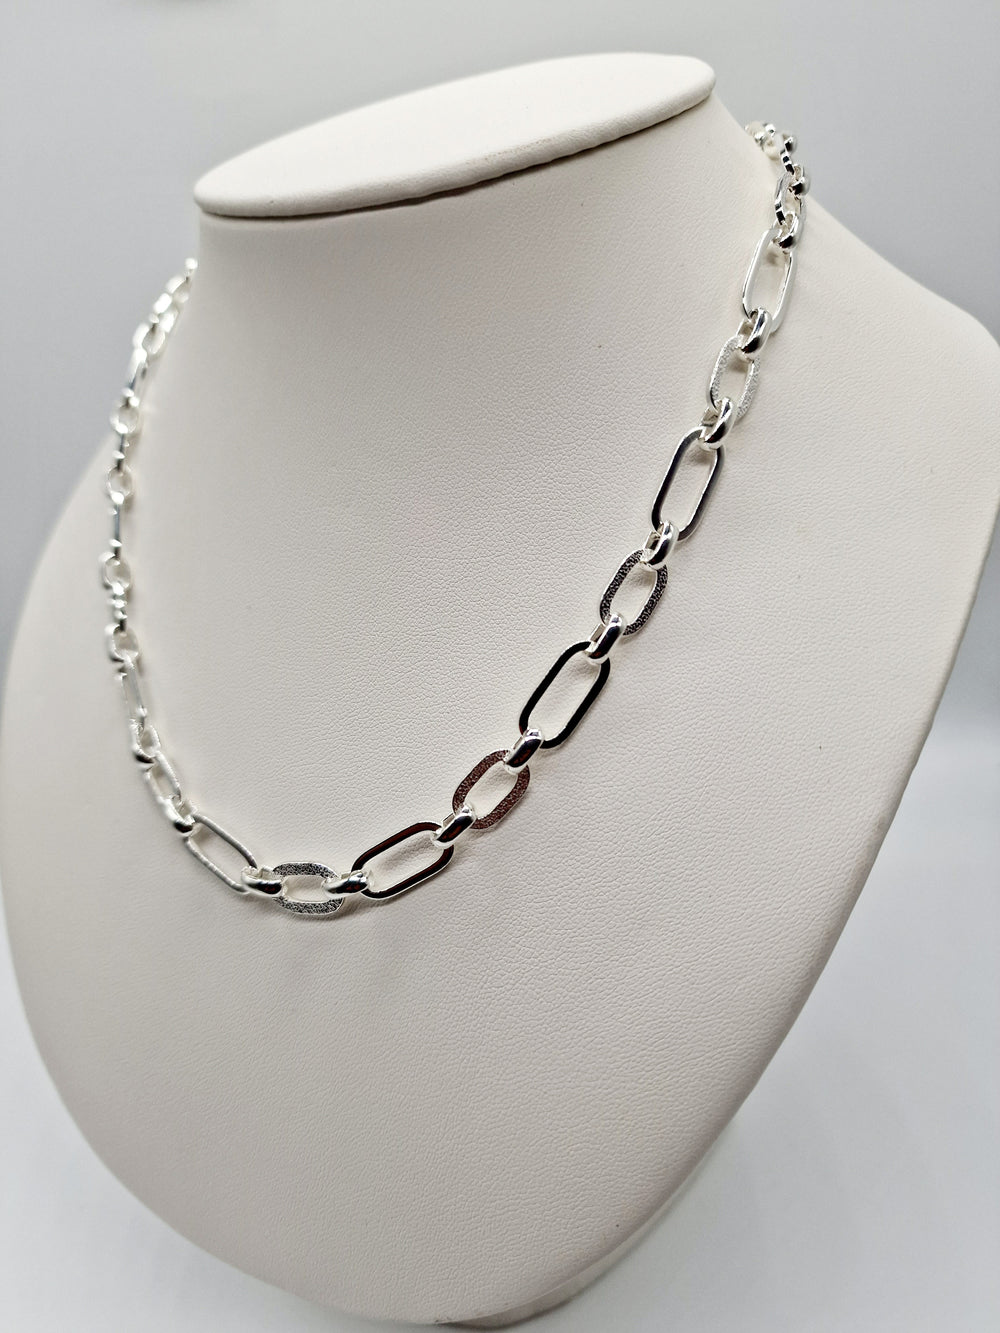 Silver 8mm Oval Necklace